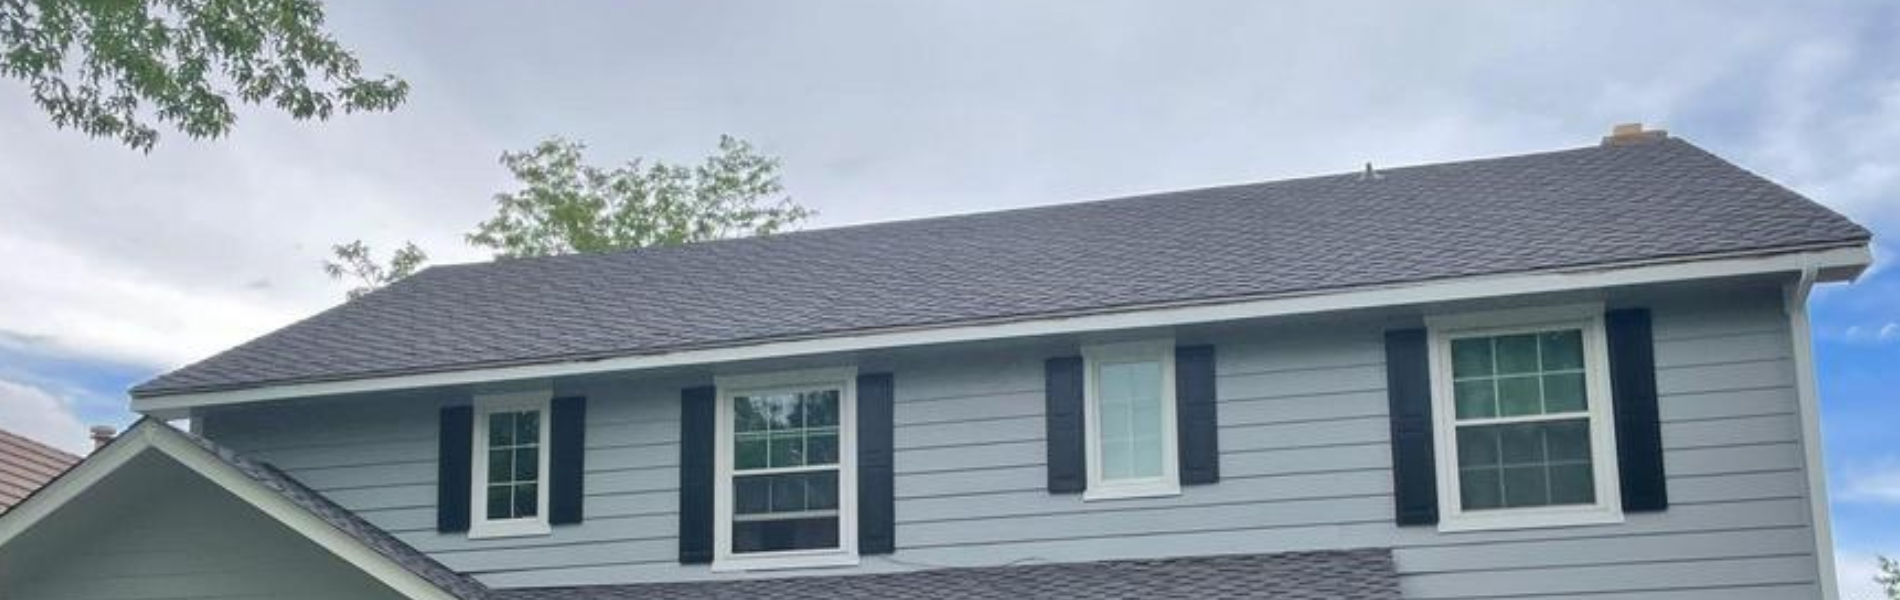 The Pros And Cons Of Asphalt Roofing For Your Home